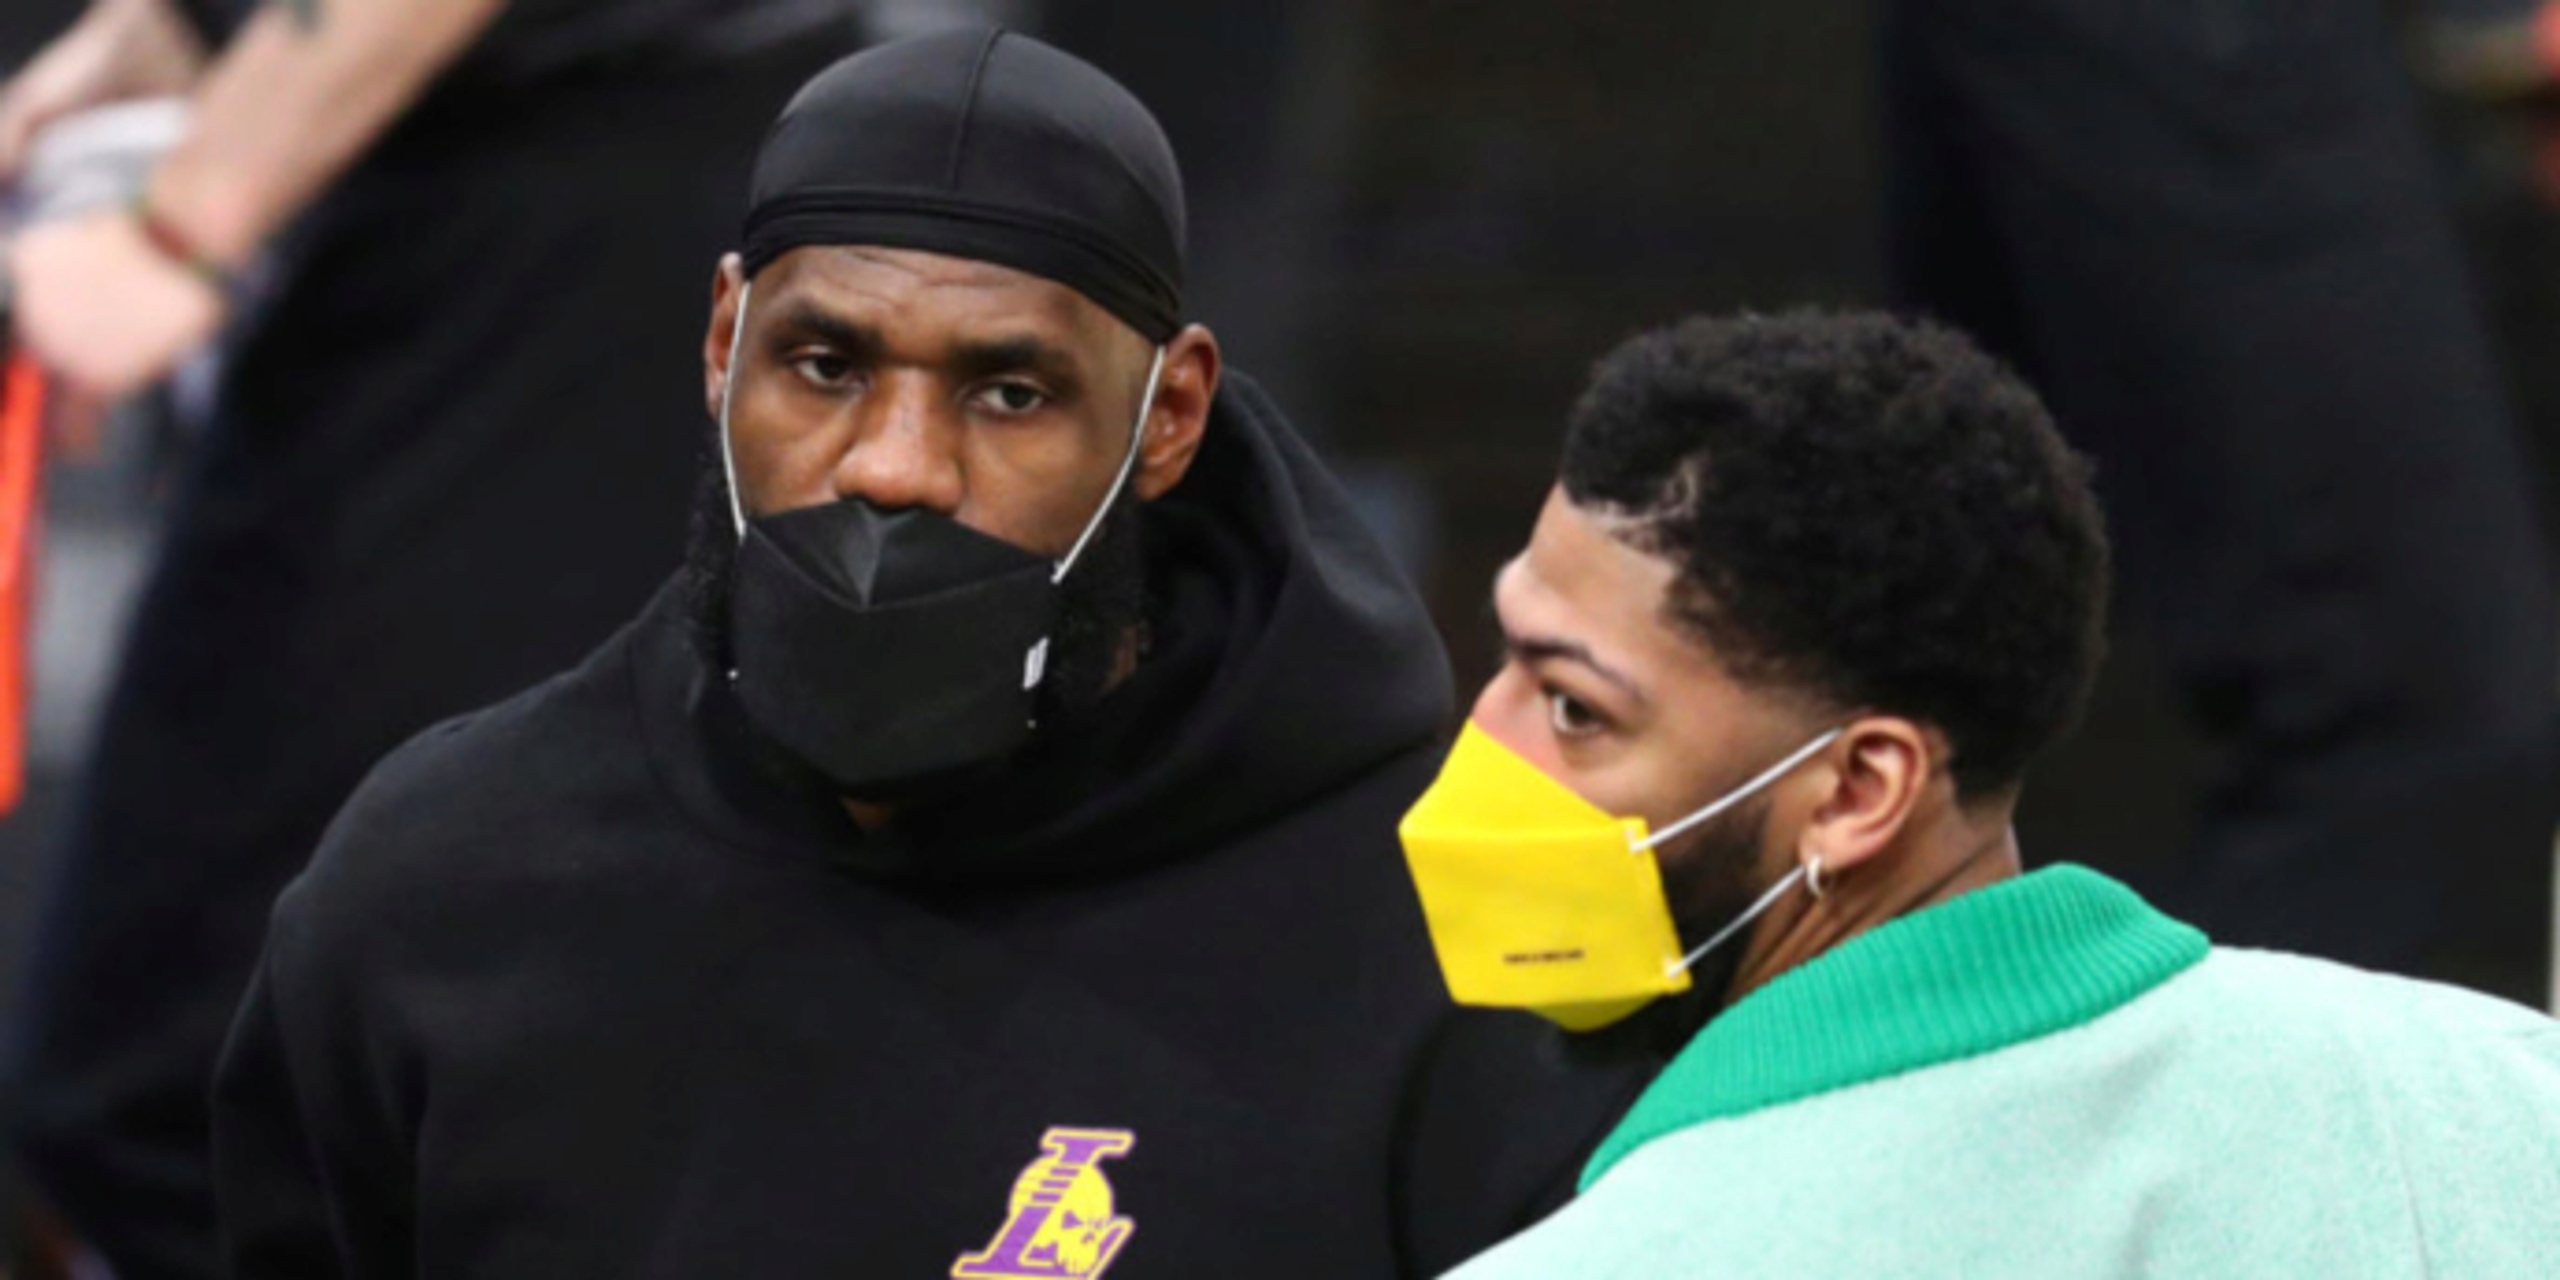 Anthony Davis could return in 10-14 days, LeBron James close behind